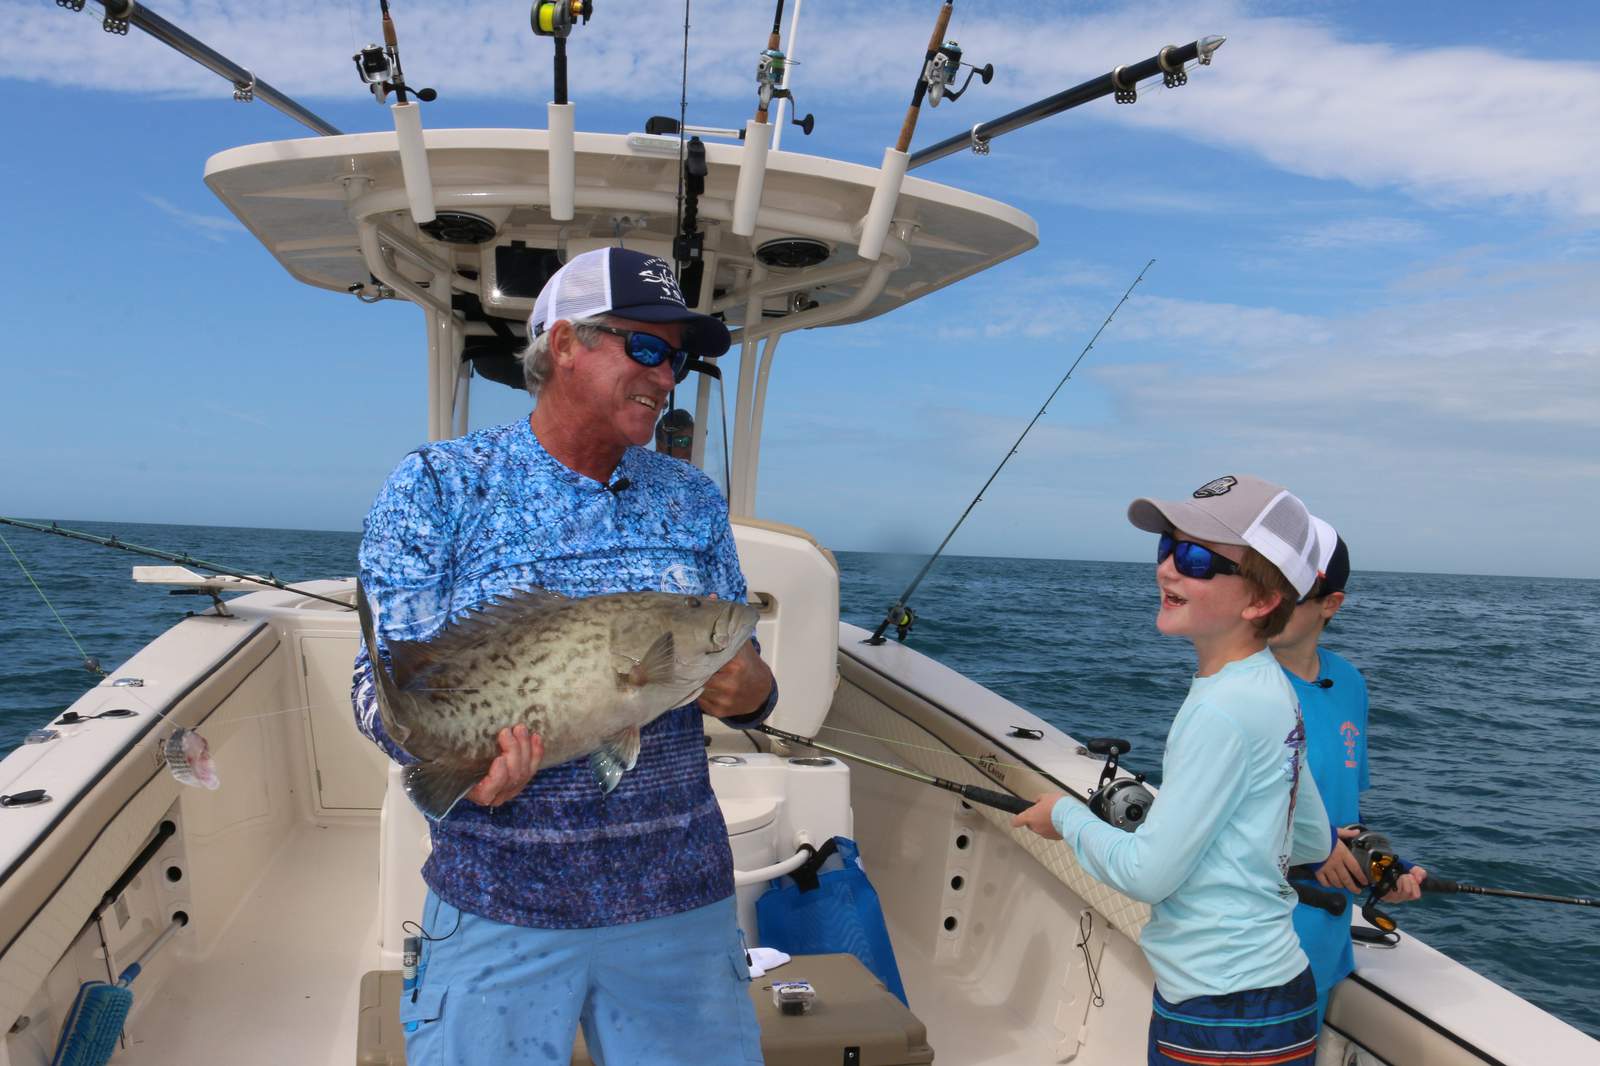 Snook fishing closes, Gag Grouper in the Gulf opens June 1st